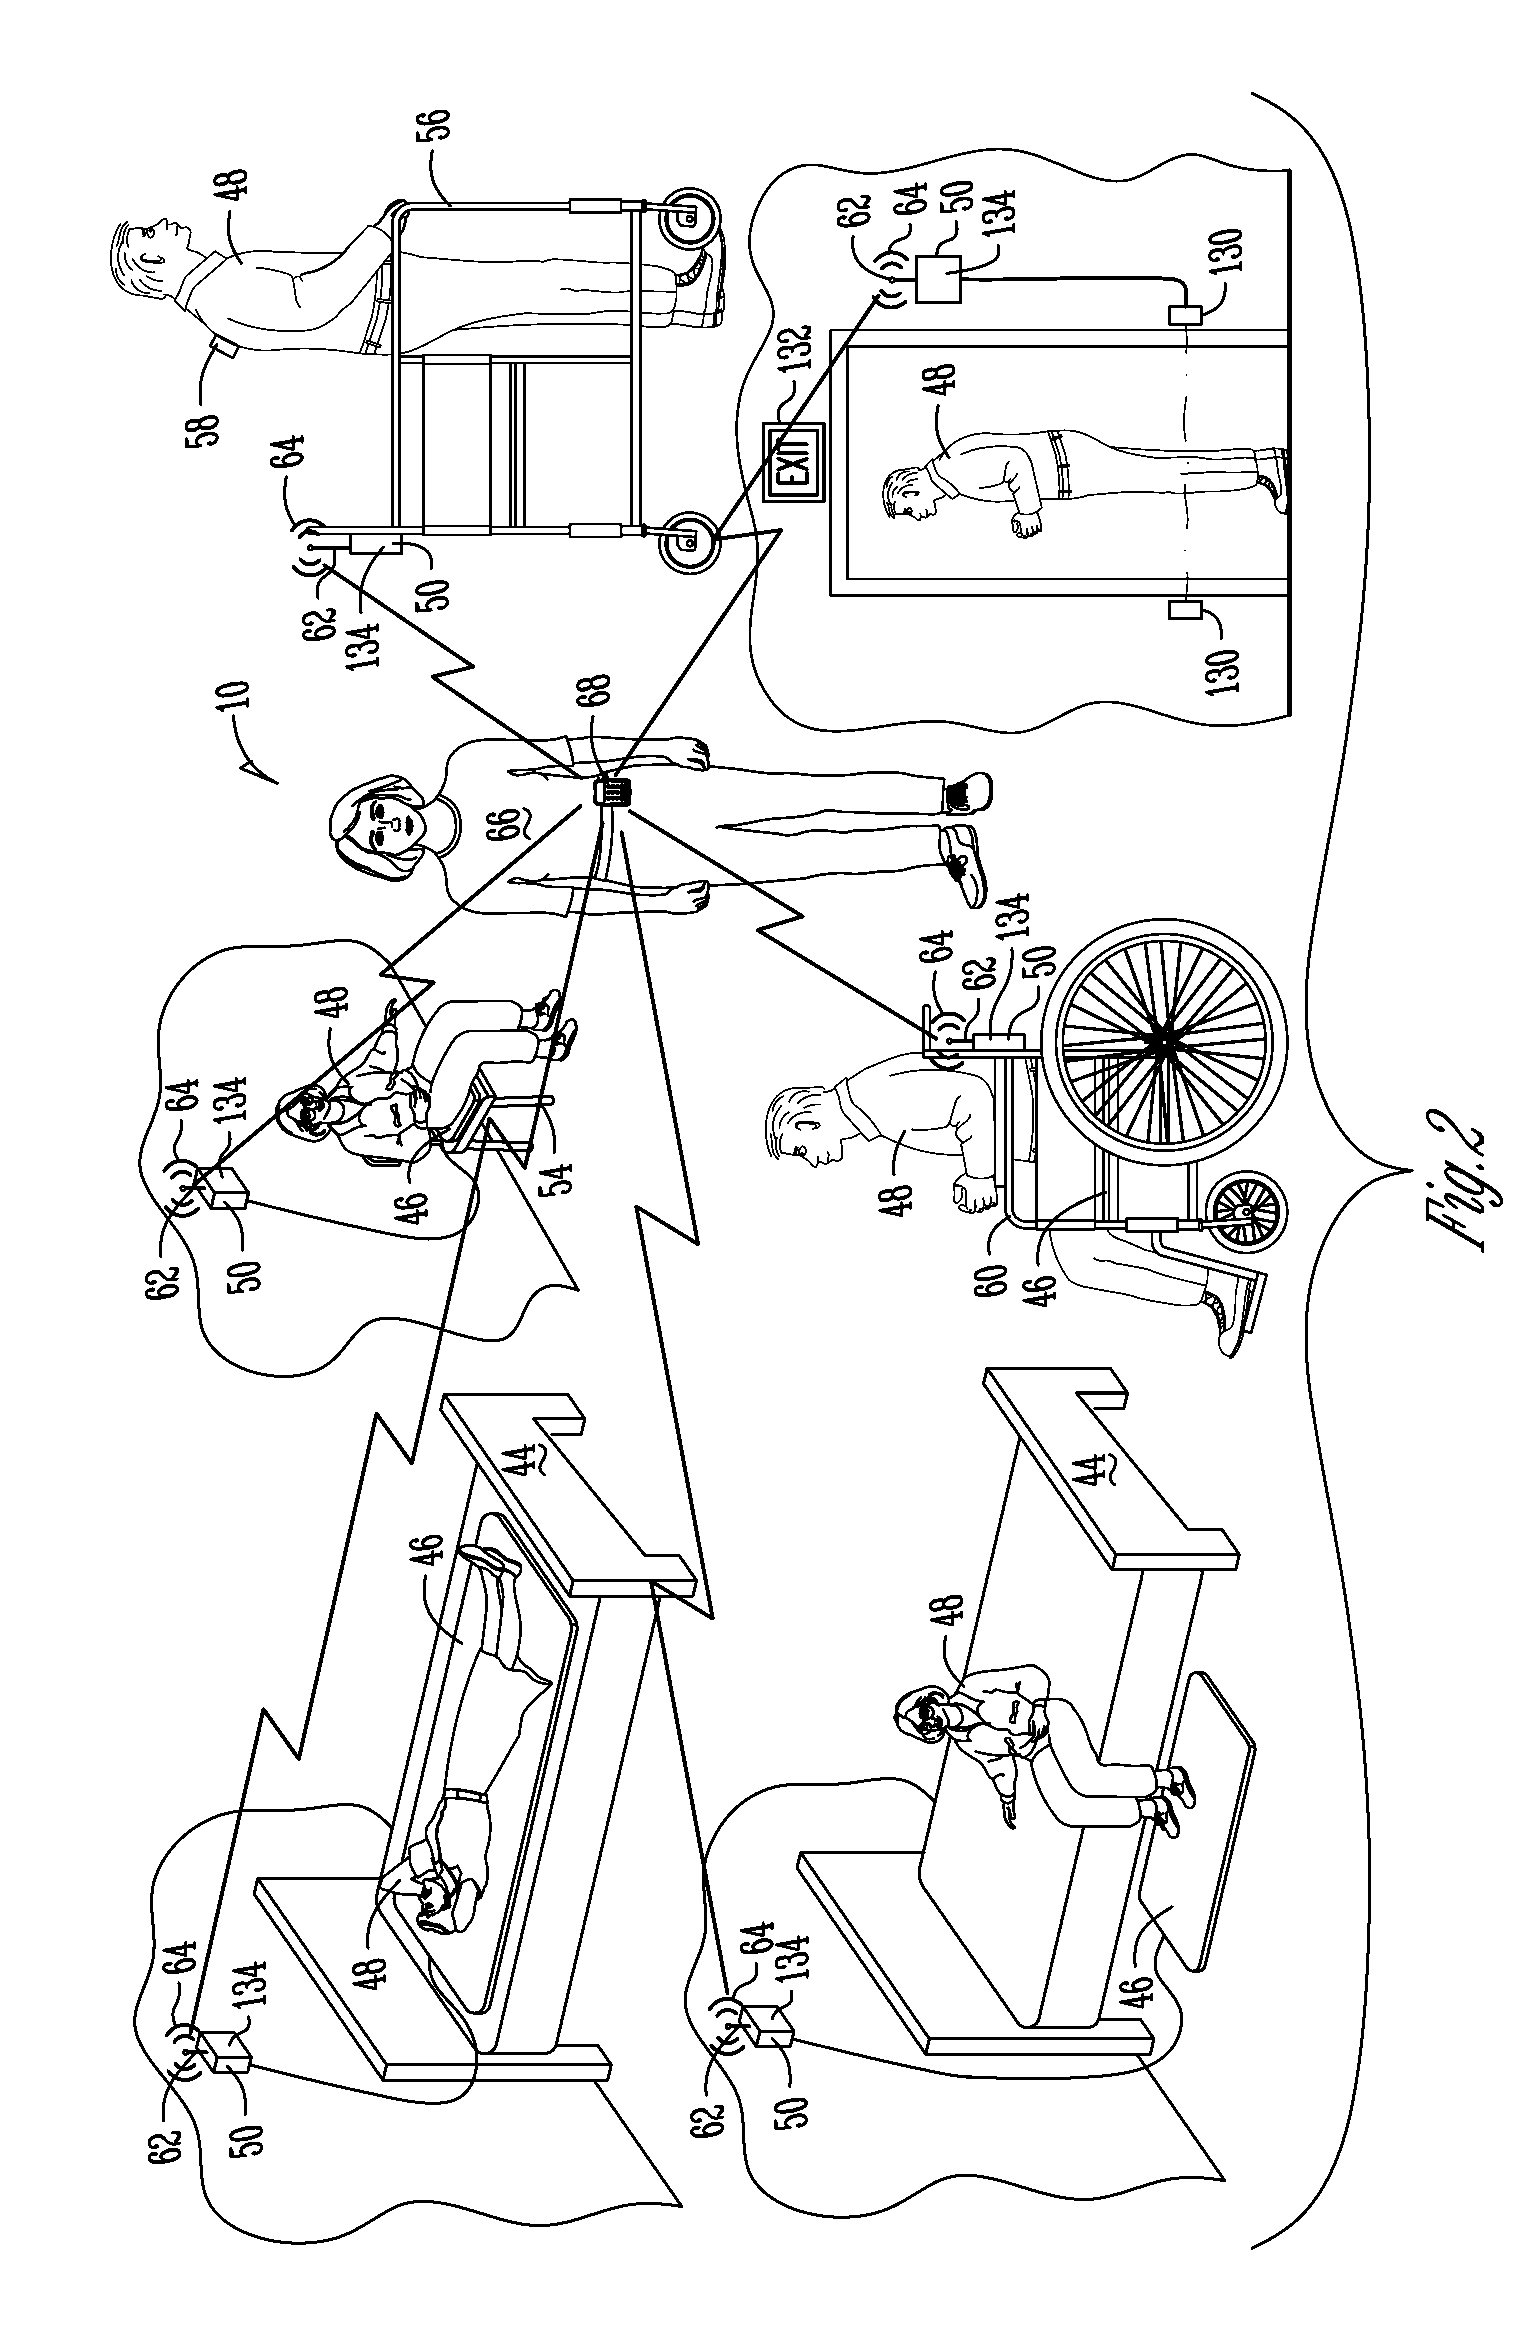 Medical device and method for preventing falls